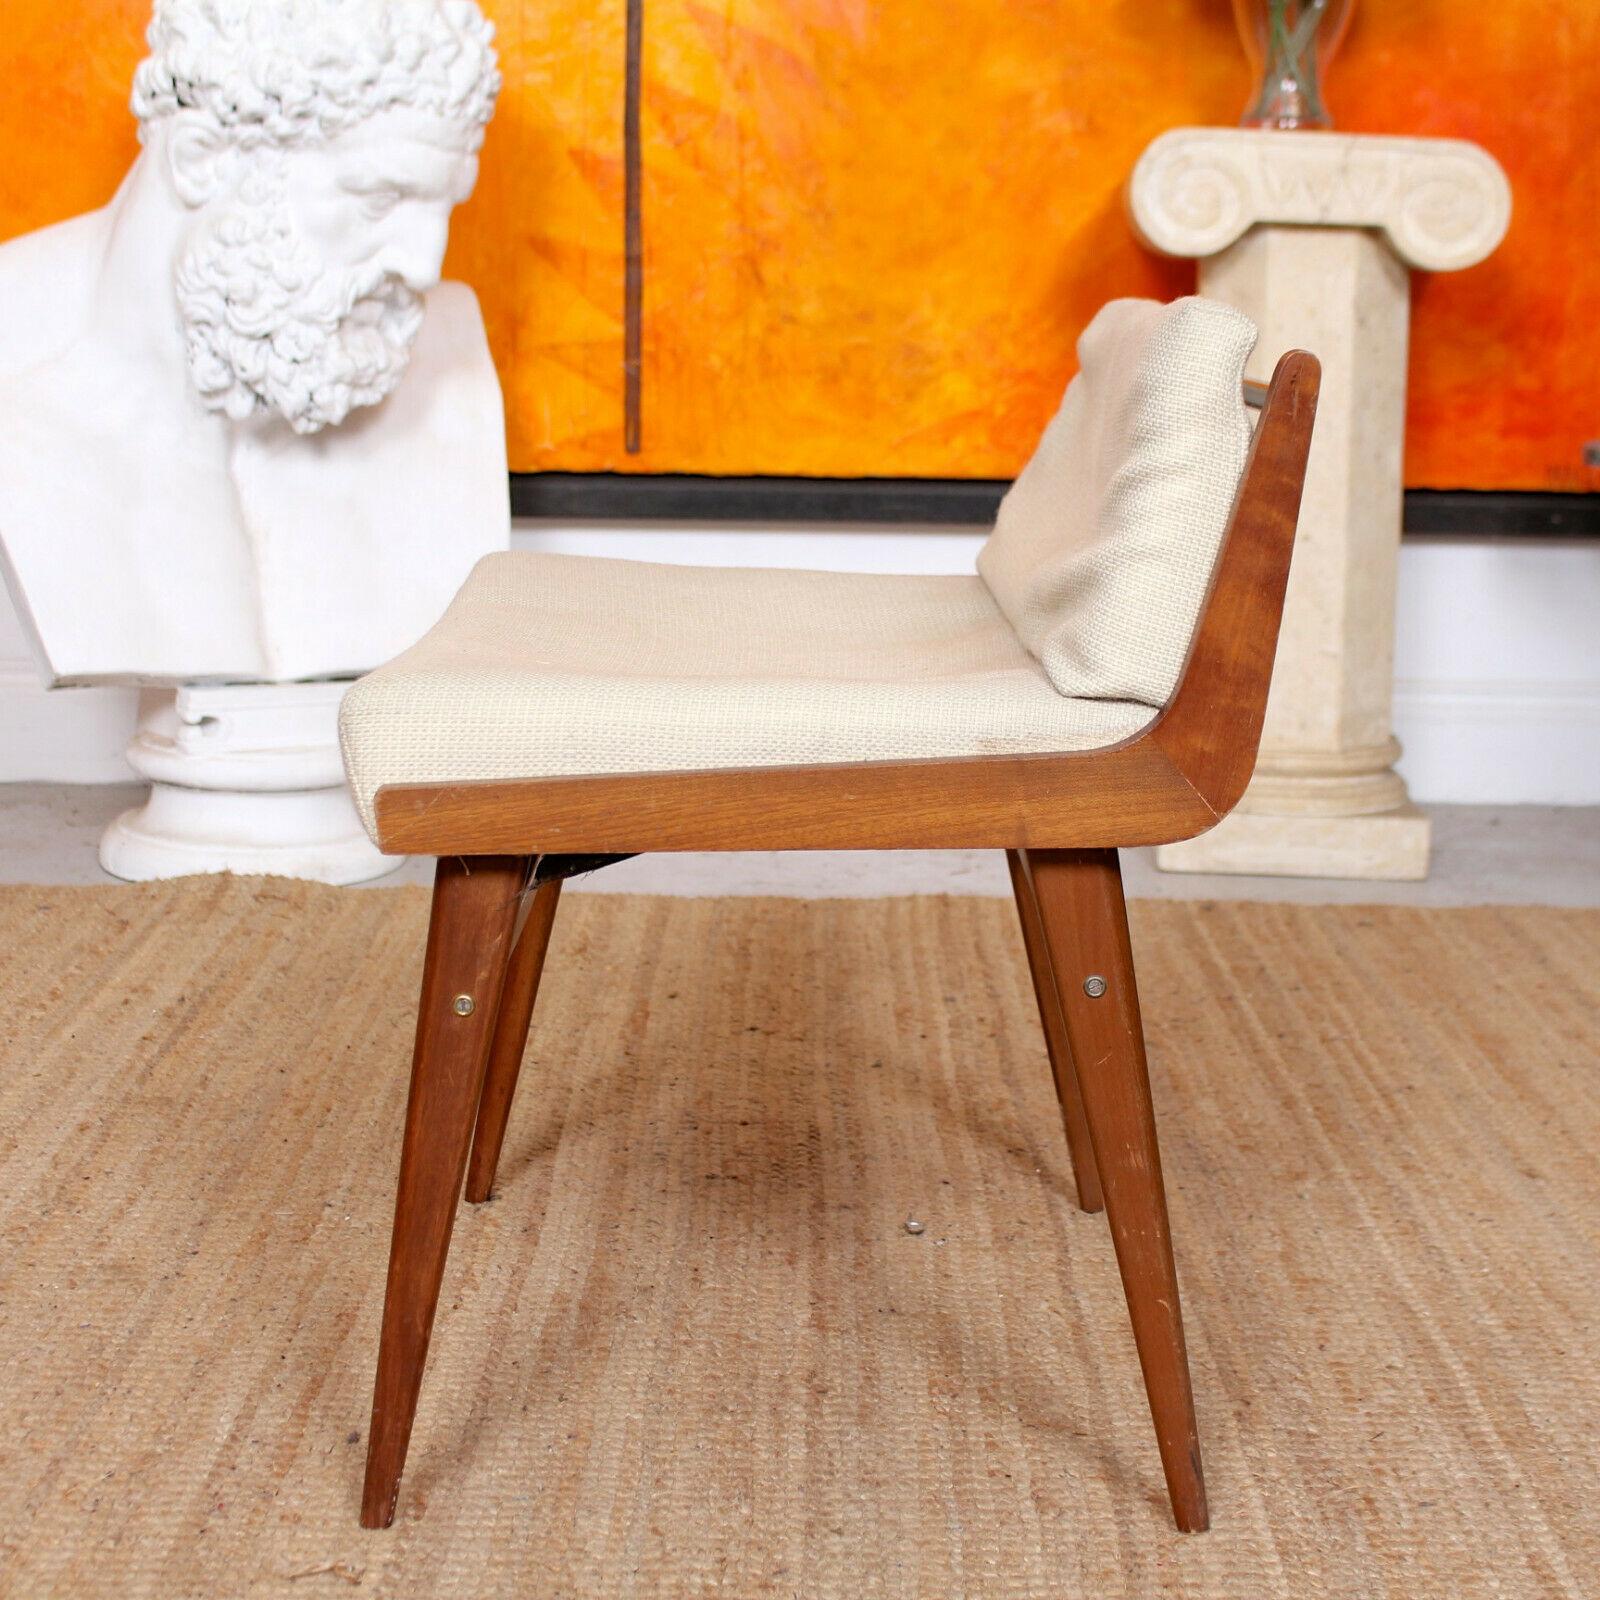 Danish Teak Stool In Good Condition For Sale In Newcastle upon Tyne, GB